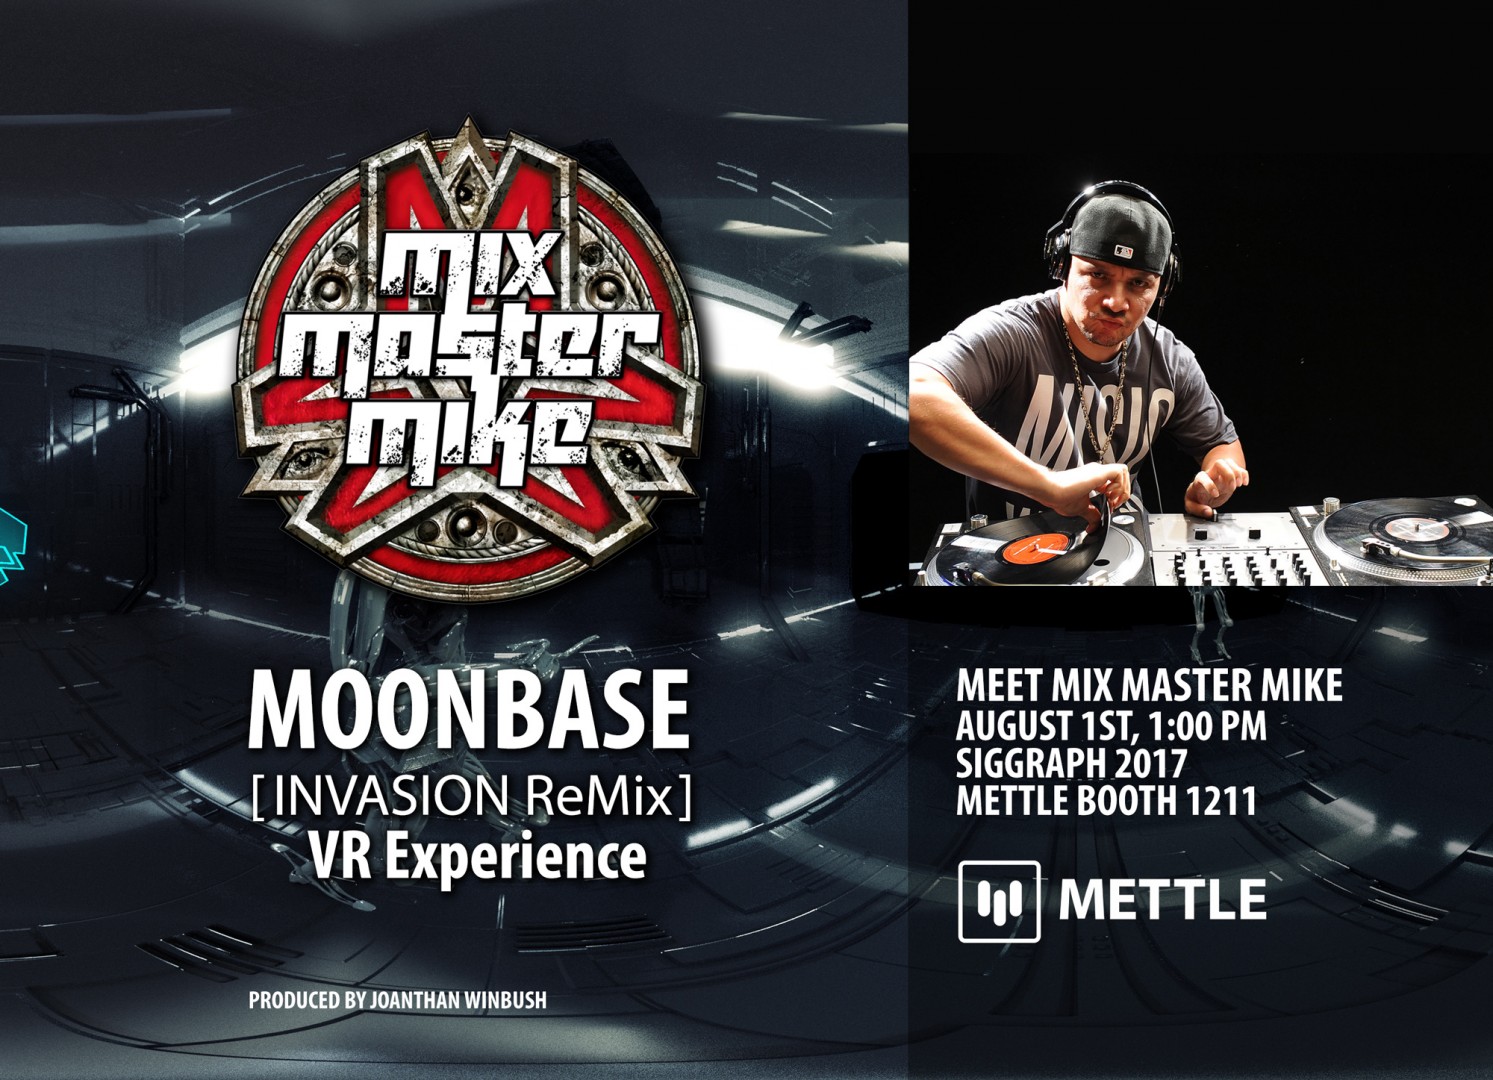 Mettle Presents: Mix Master Mike & MOONBASE INVASION ReMix at Siggraph